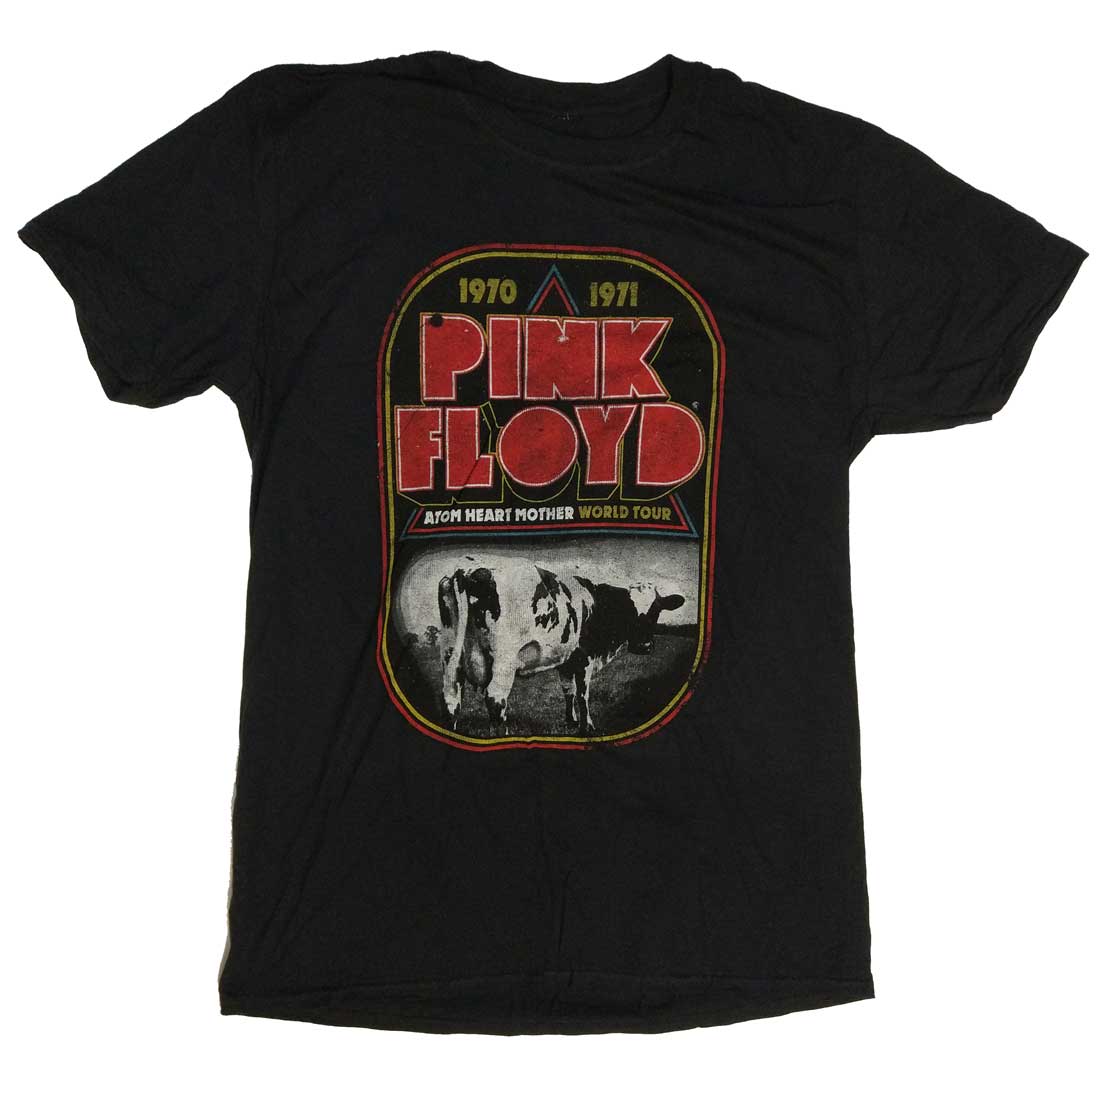 Pink Floyd T Shirt - Atom Heart Mother 1970-71 Tour Retro Style 100% Official